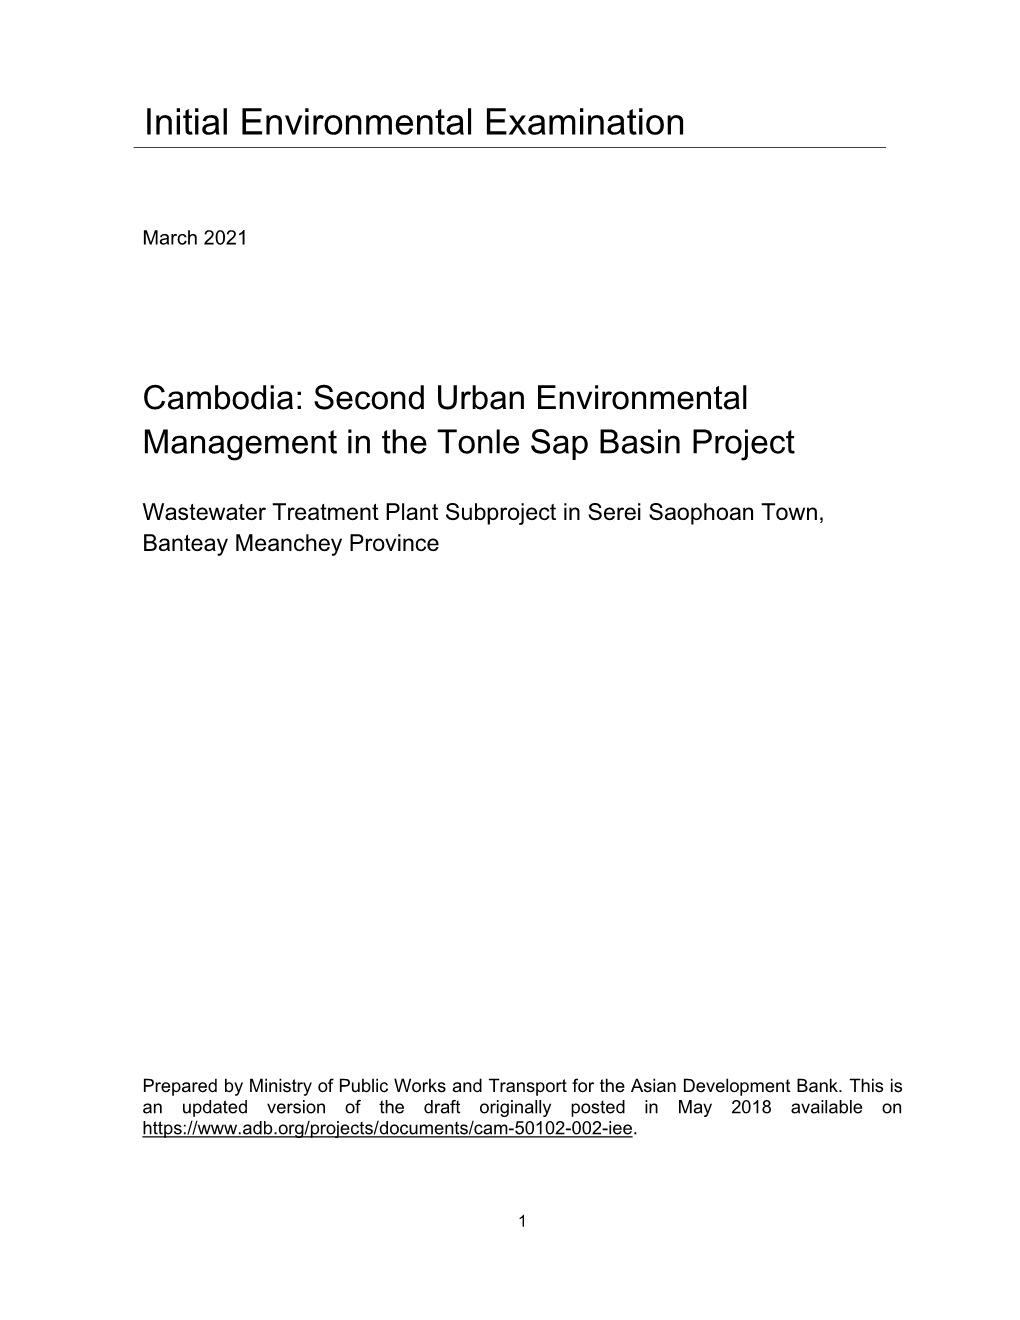 Cambodia: Second Urban Environmental Management in the Tonle Sap Basin Project